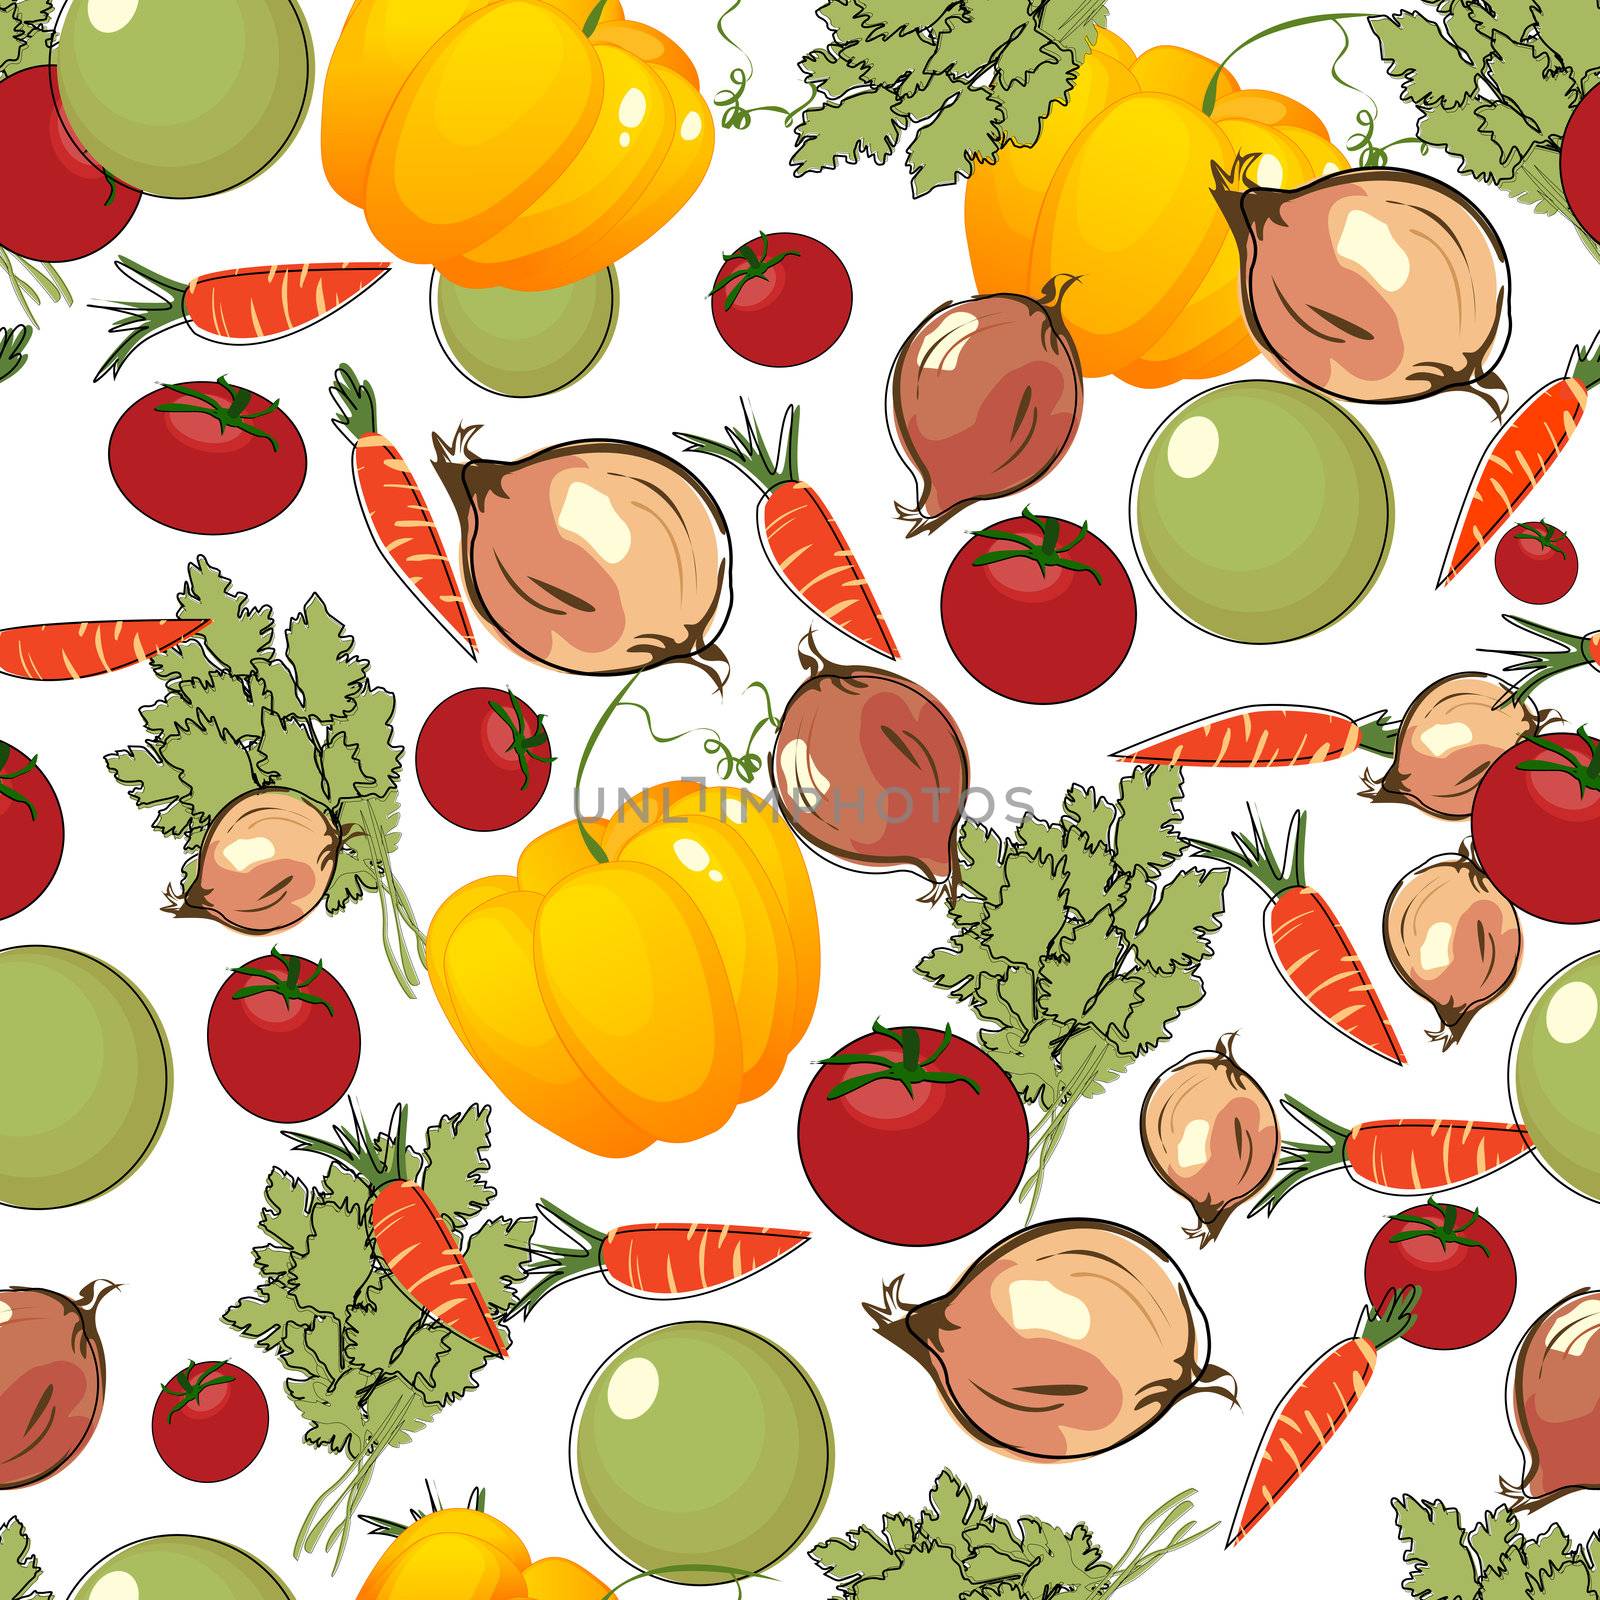 Saemless background with vegetables, pattern